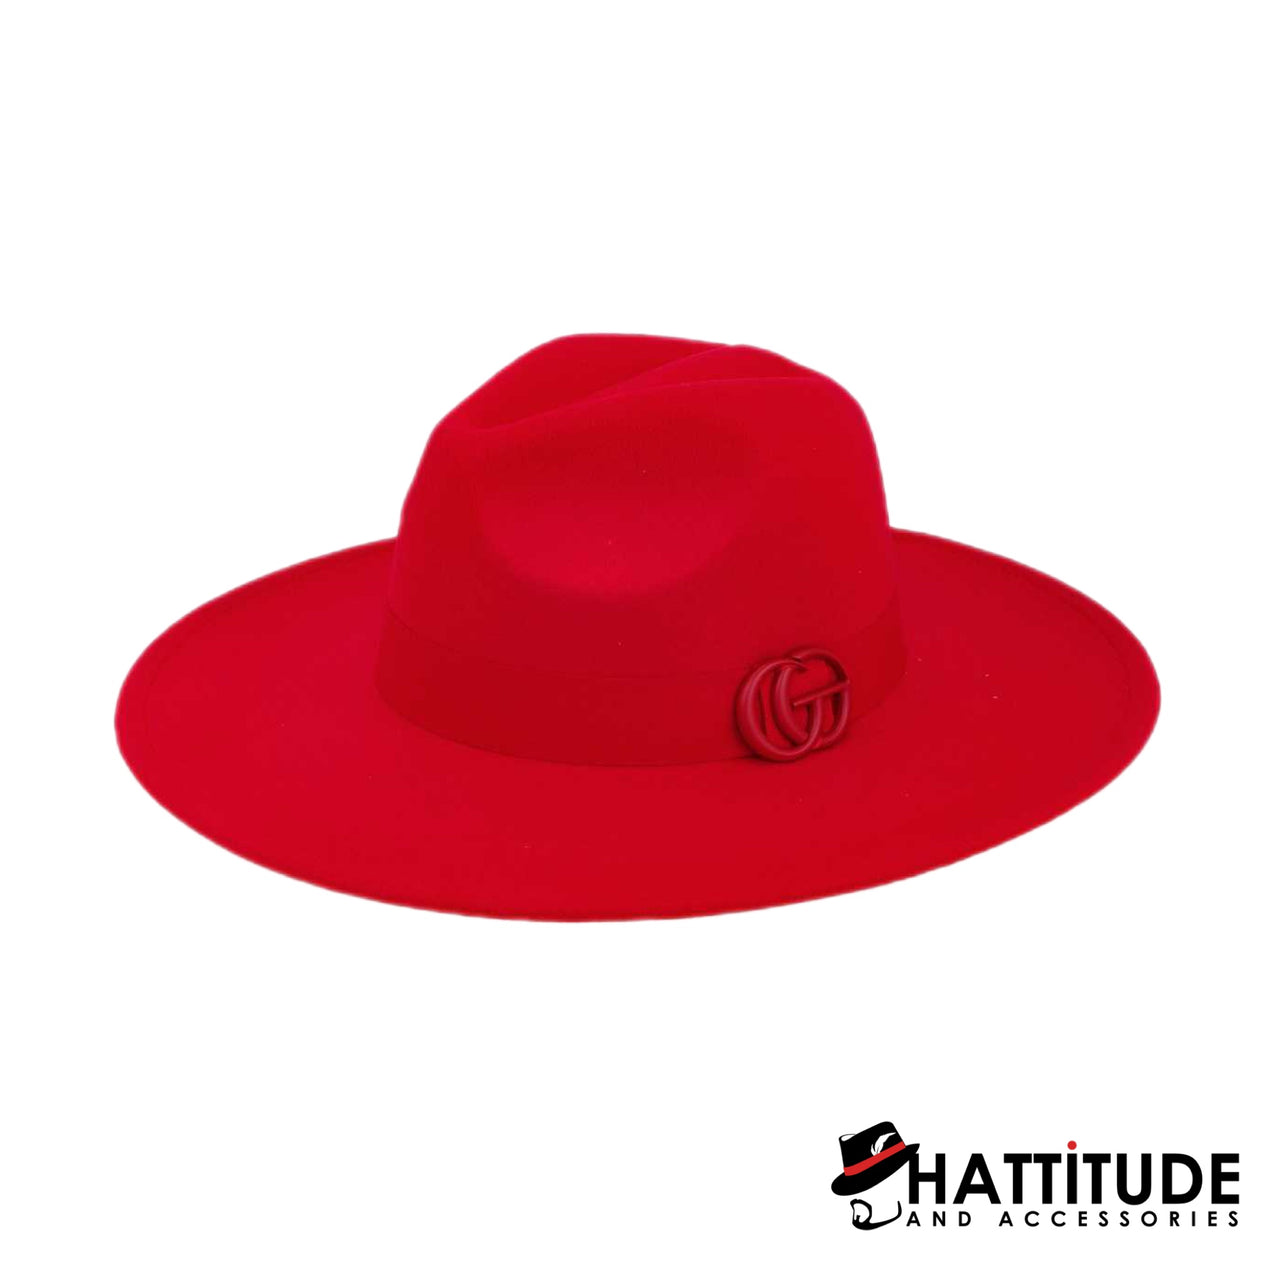 GC 'Limited Collection' - Red - Hattitude